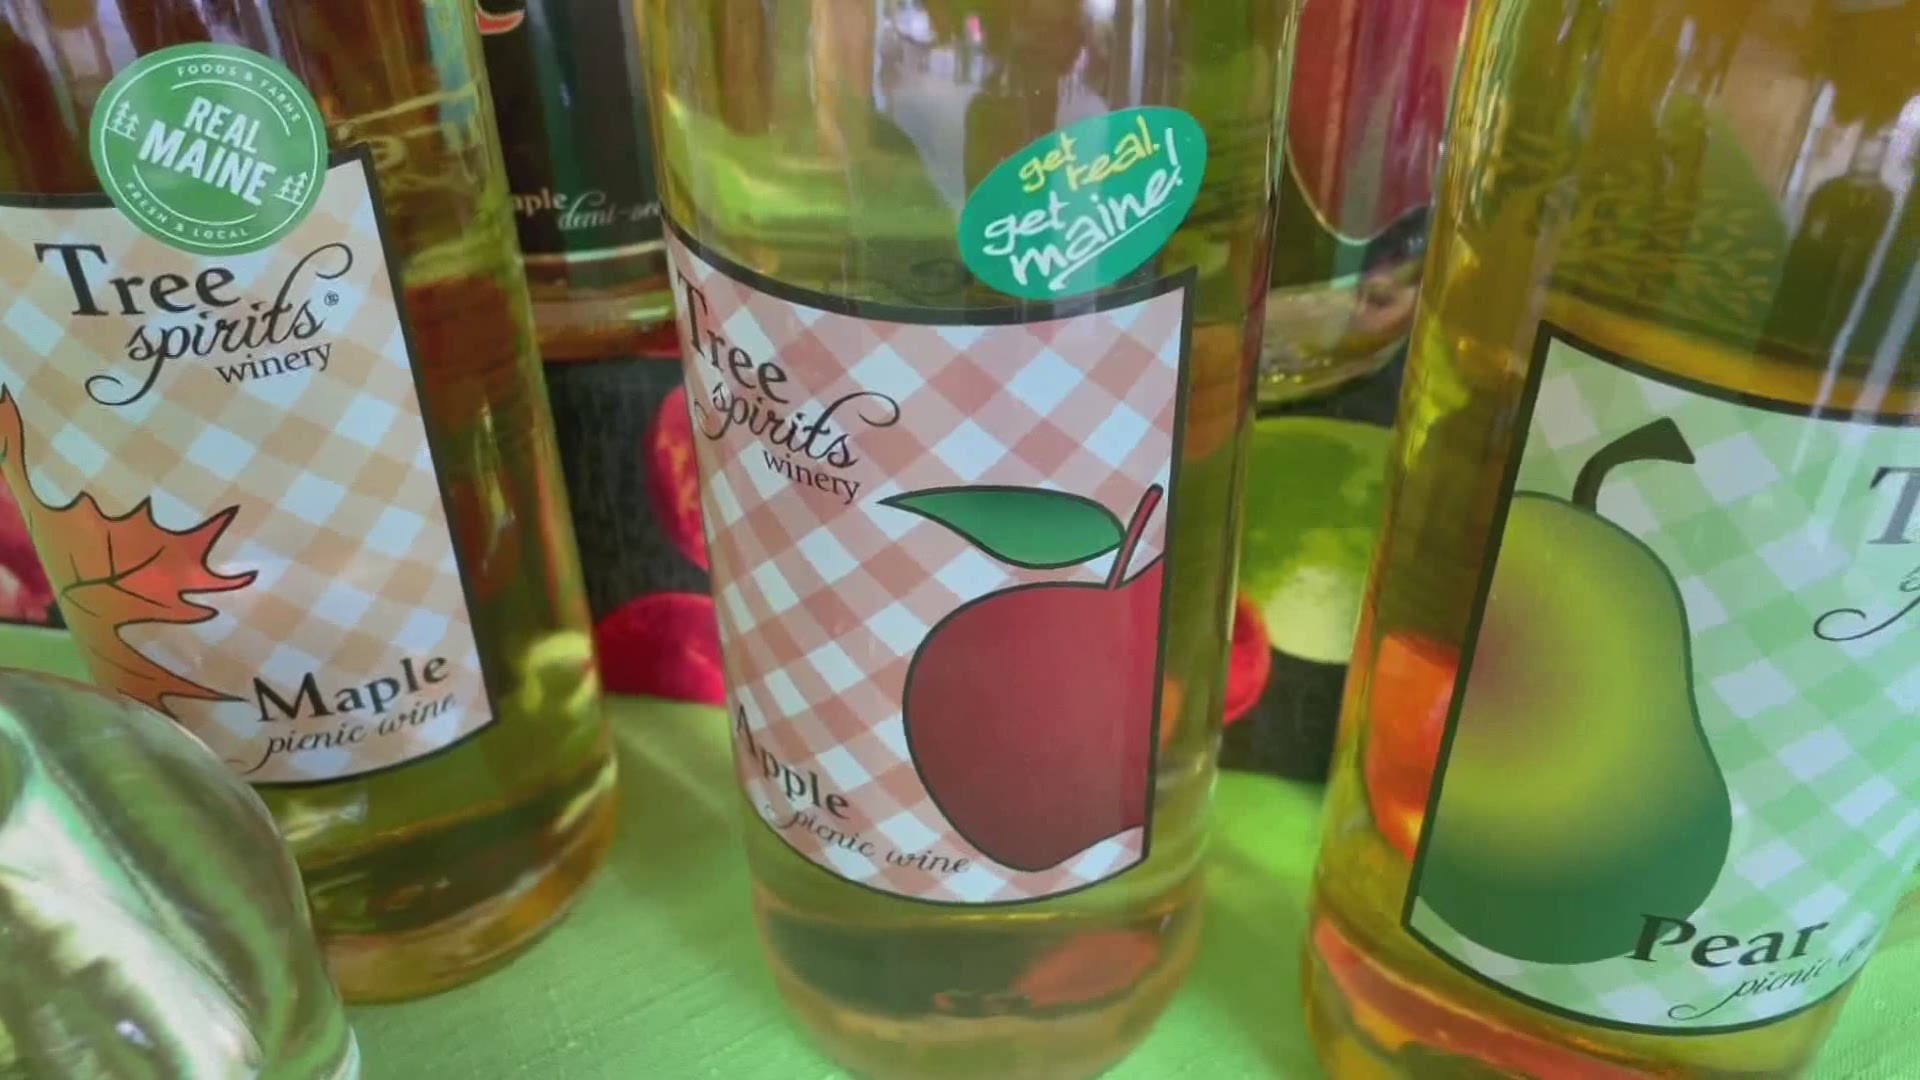 While Maine isn't really known for it's wines, local producers are hoping to change that by introducing customers to some unique flavors.